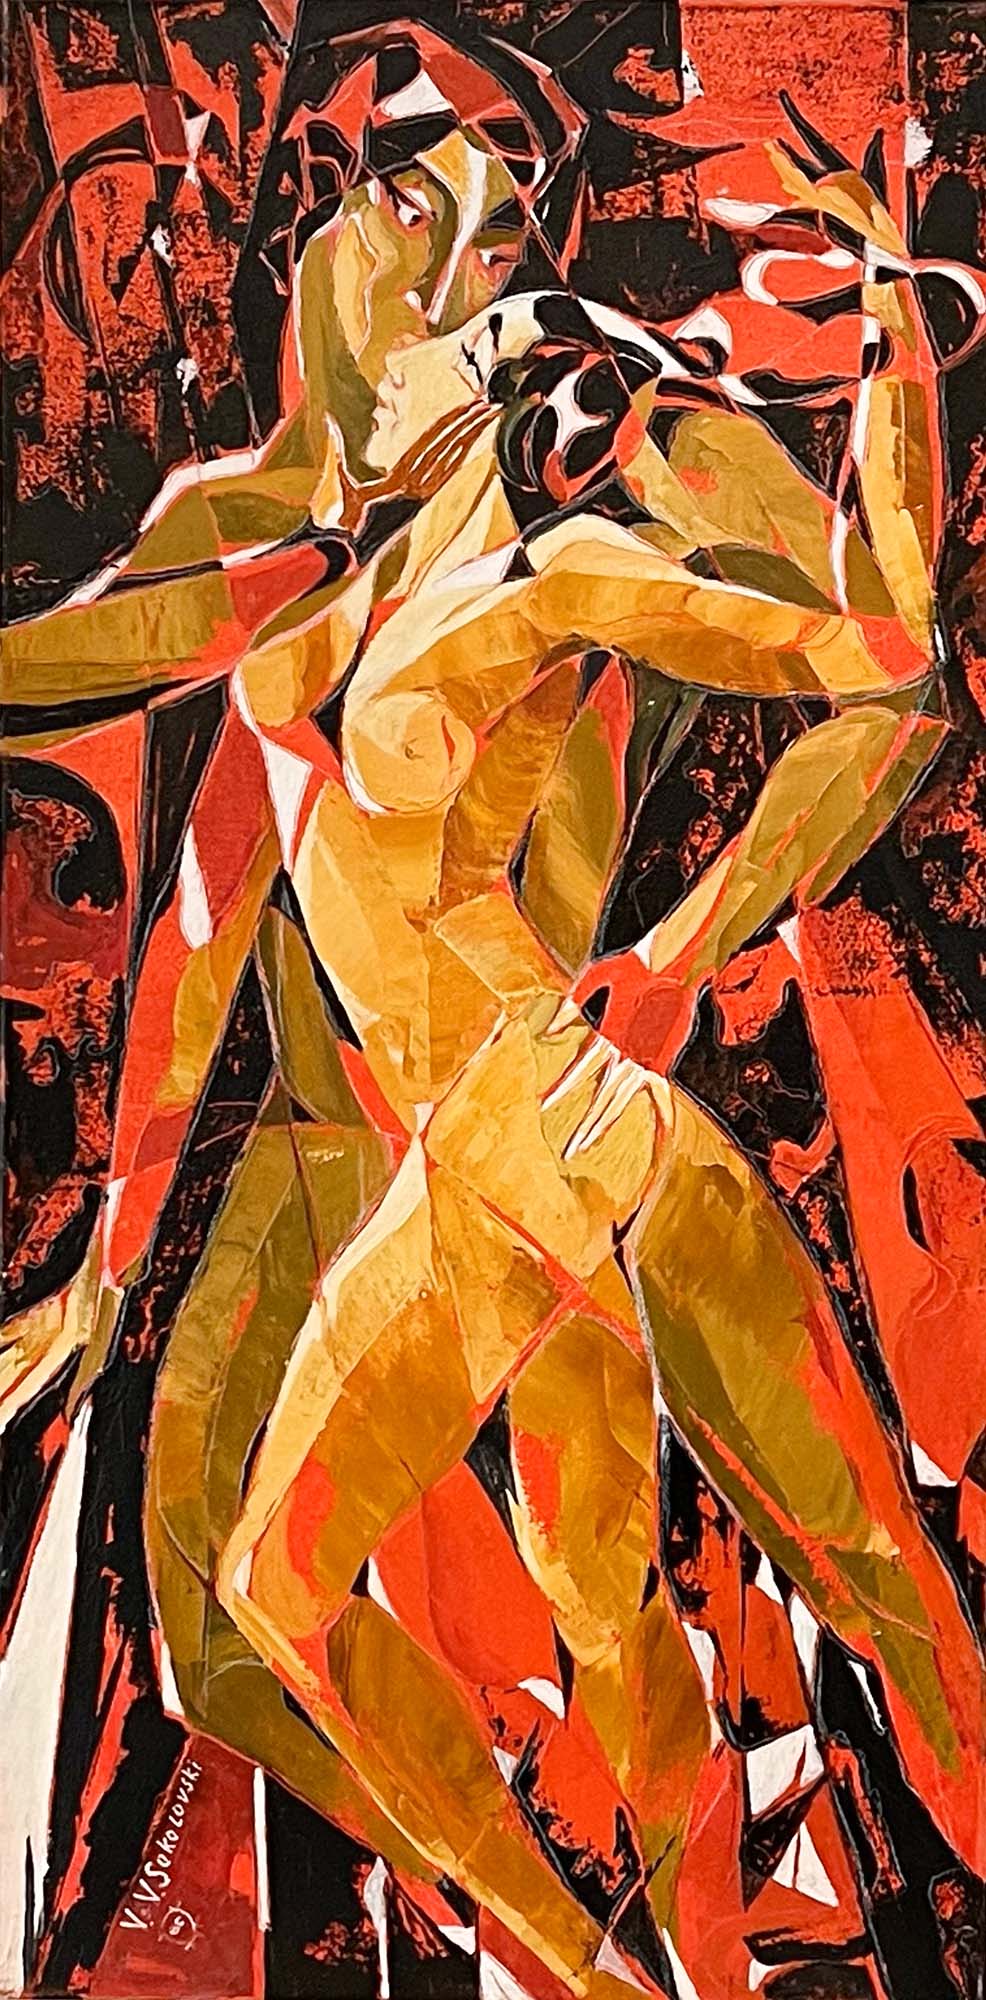 Contemporary art. Title: Tango Red, Oil on Canvas, 36X18 in by Contemporary Canadian artist Valeri Sokolovski.